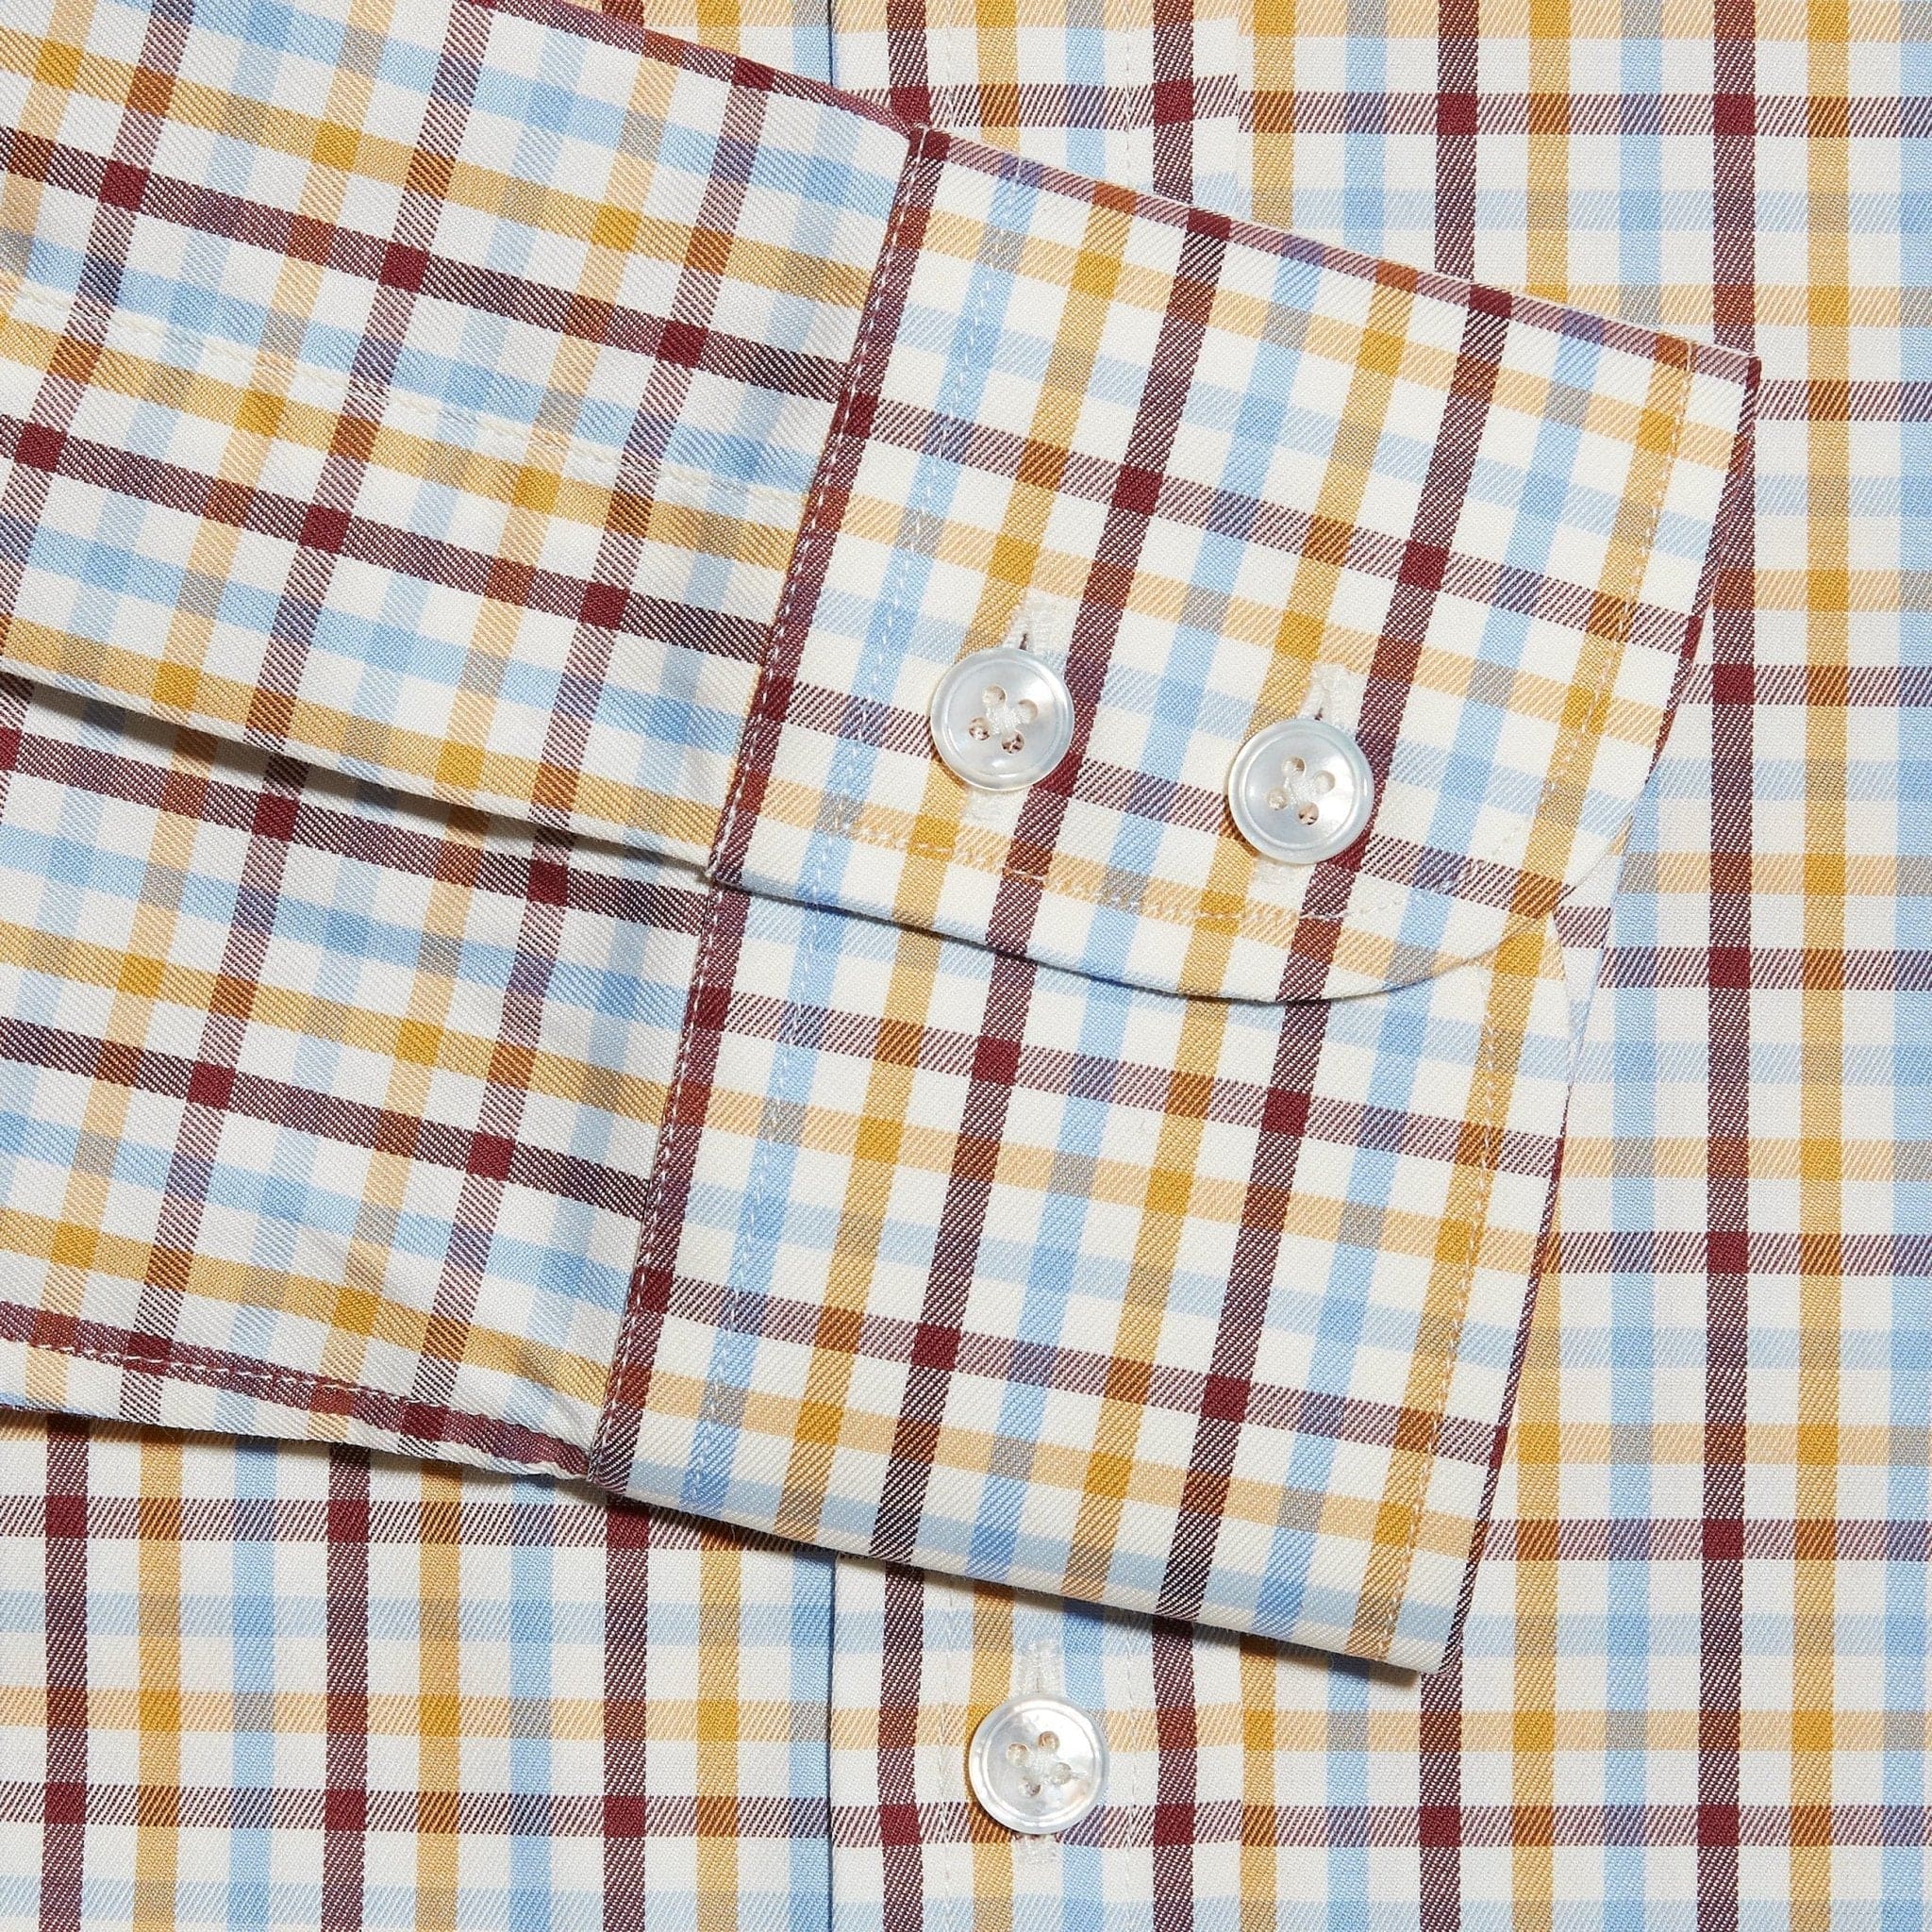 Contemporary Fit, Cut-away Collar, 2 Button Cuff Shirt in a Cream, Burgundy, Yellow & Blue Check Brushed Cotton